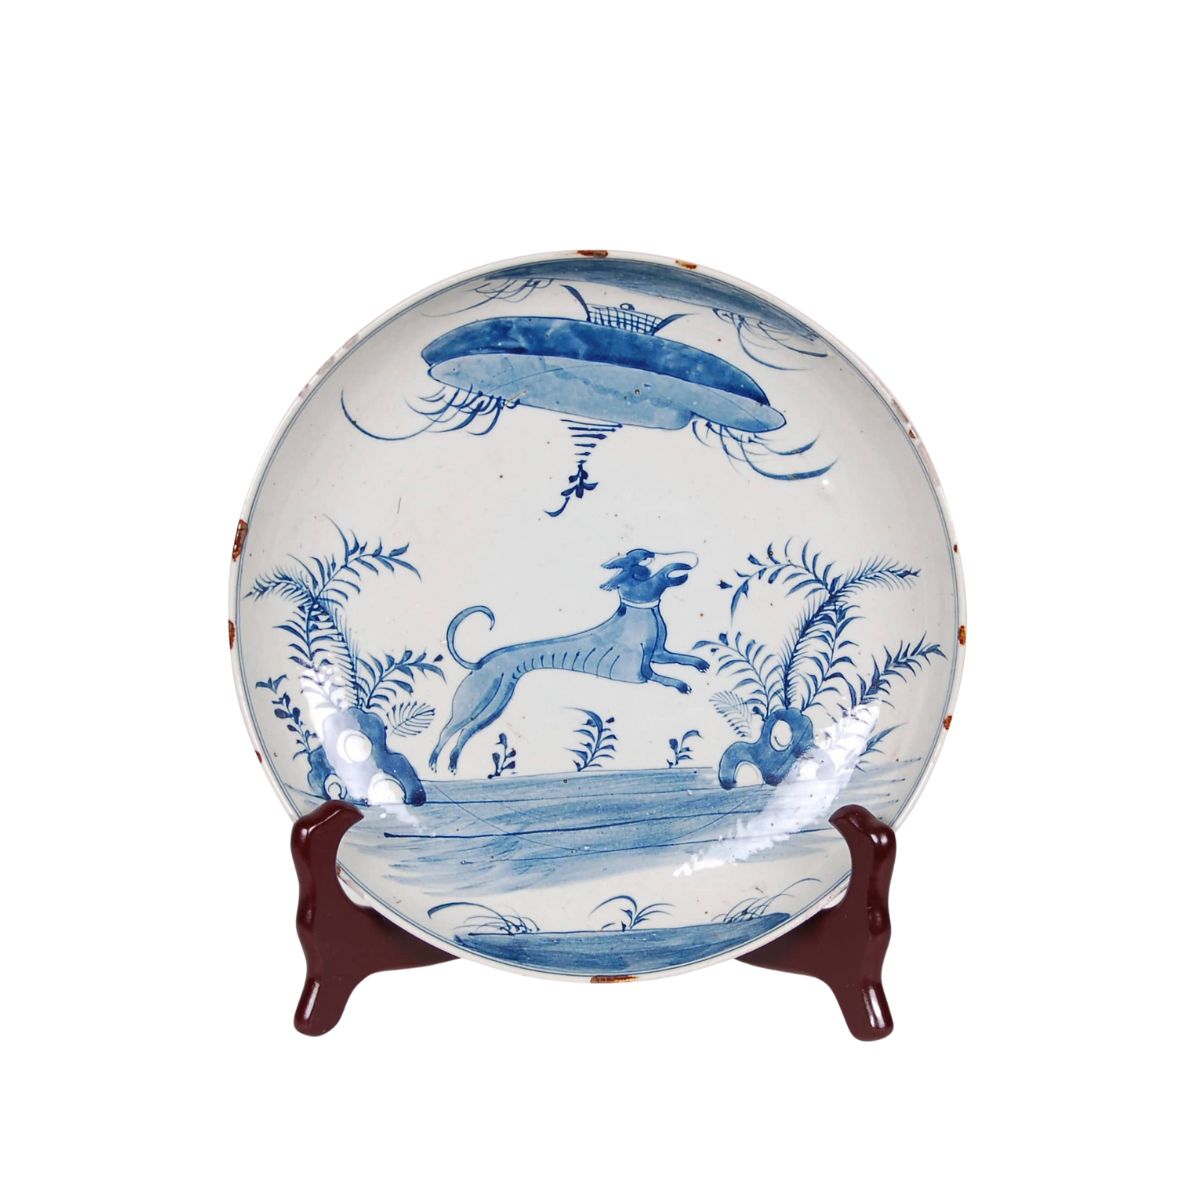 Blue and White Chinese Porcelain Charger, Dog Design